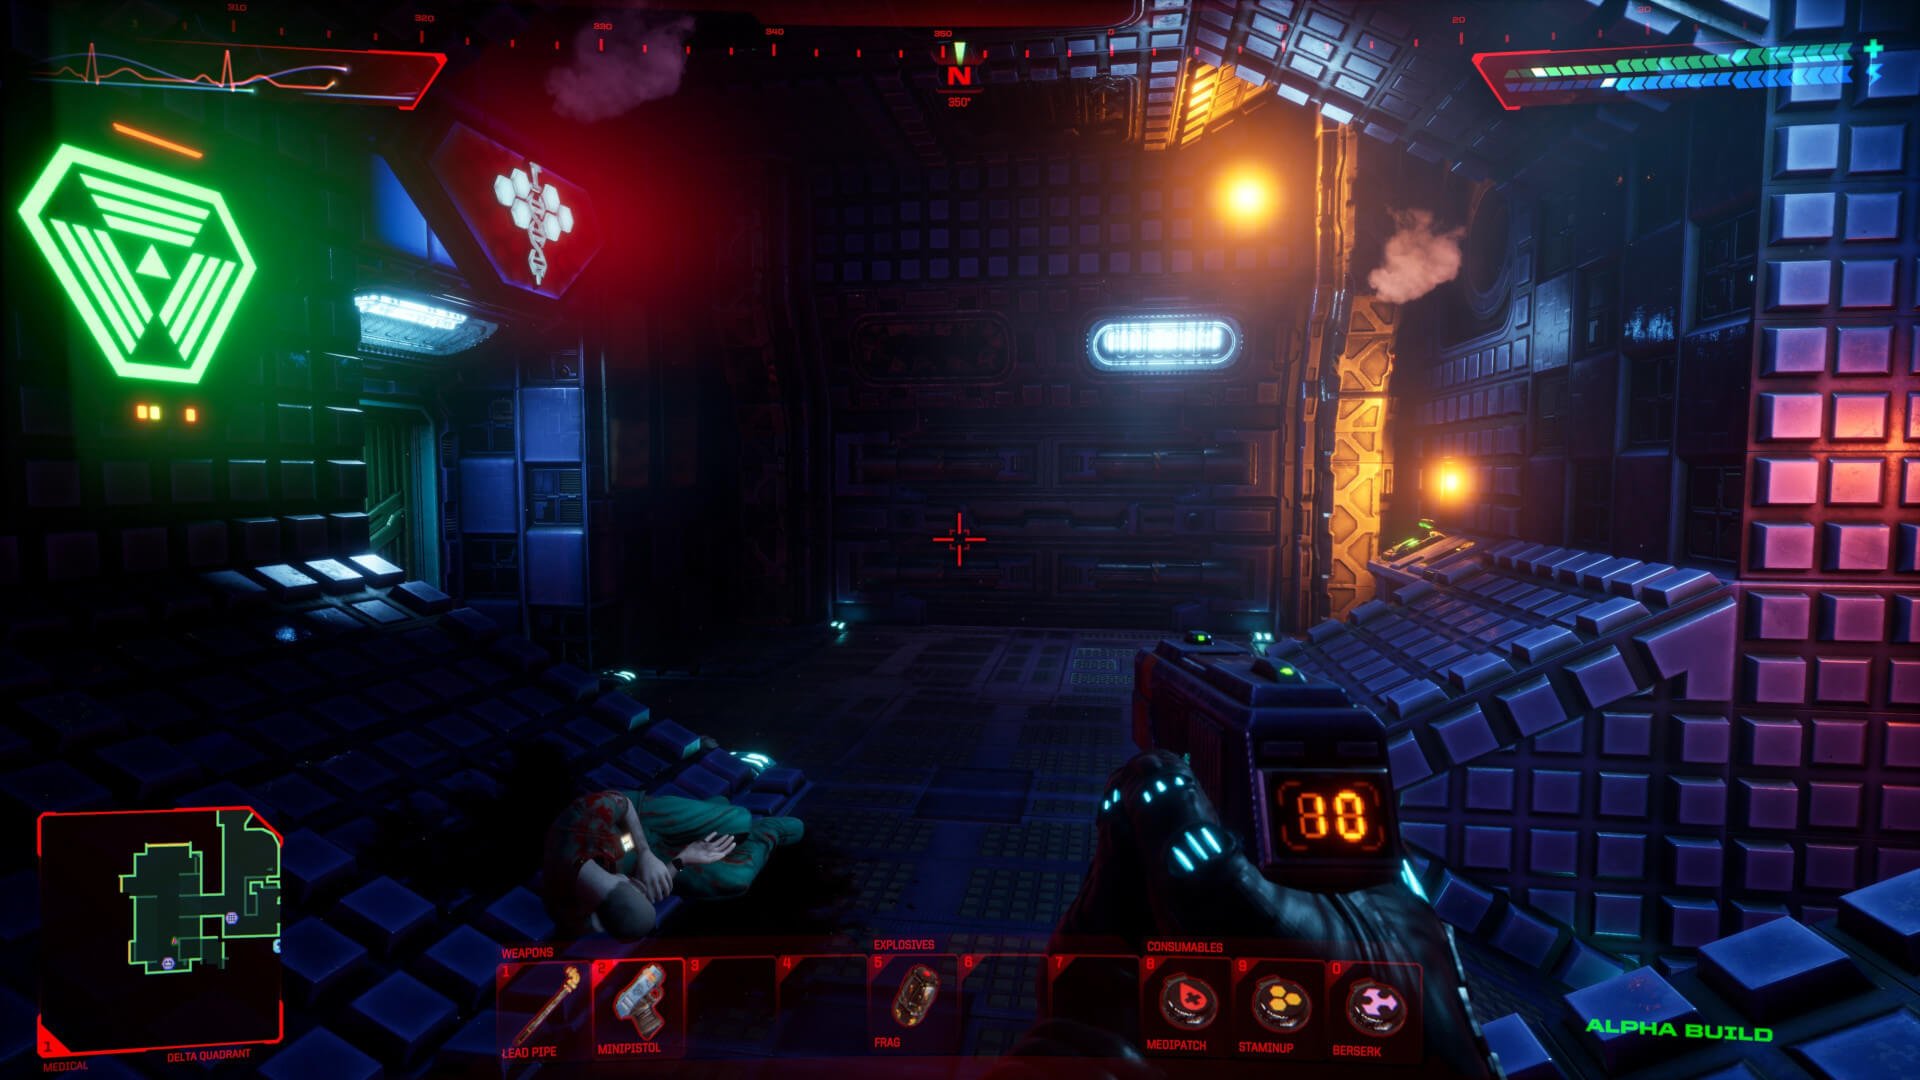 A shot of the System Shock remake in development at Nightdive Studio